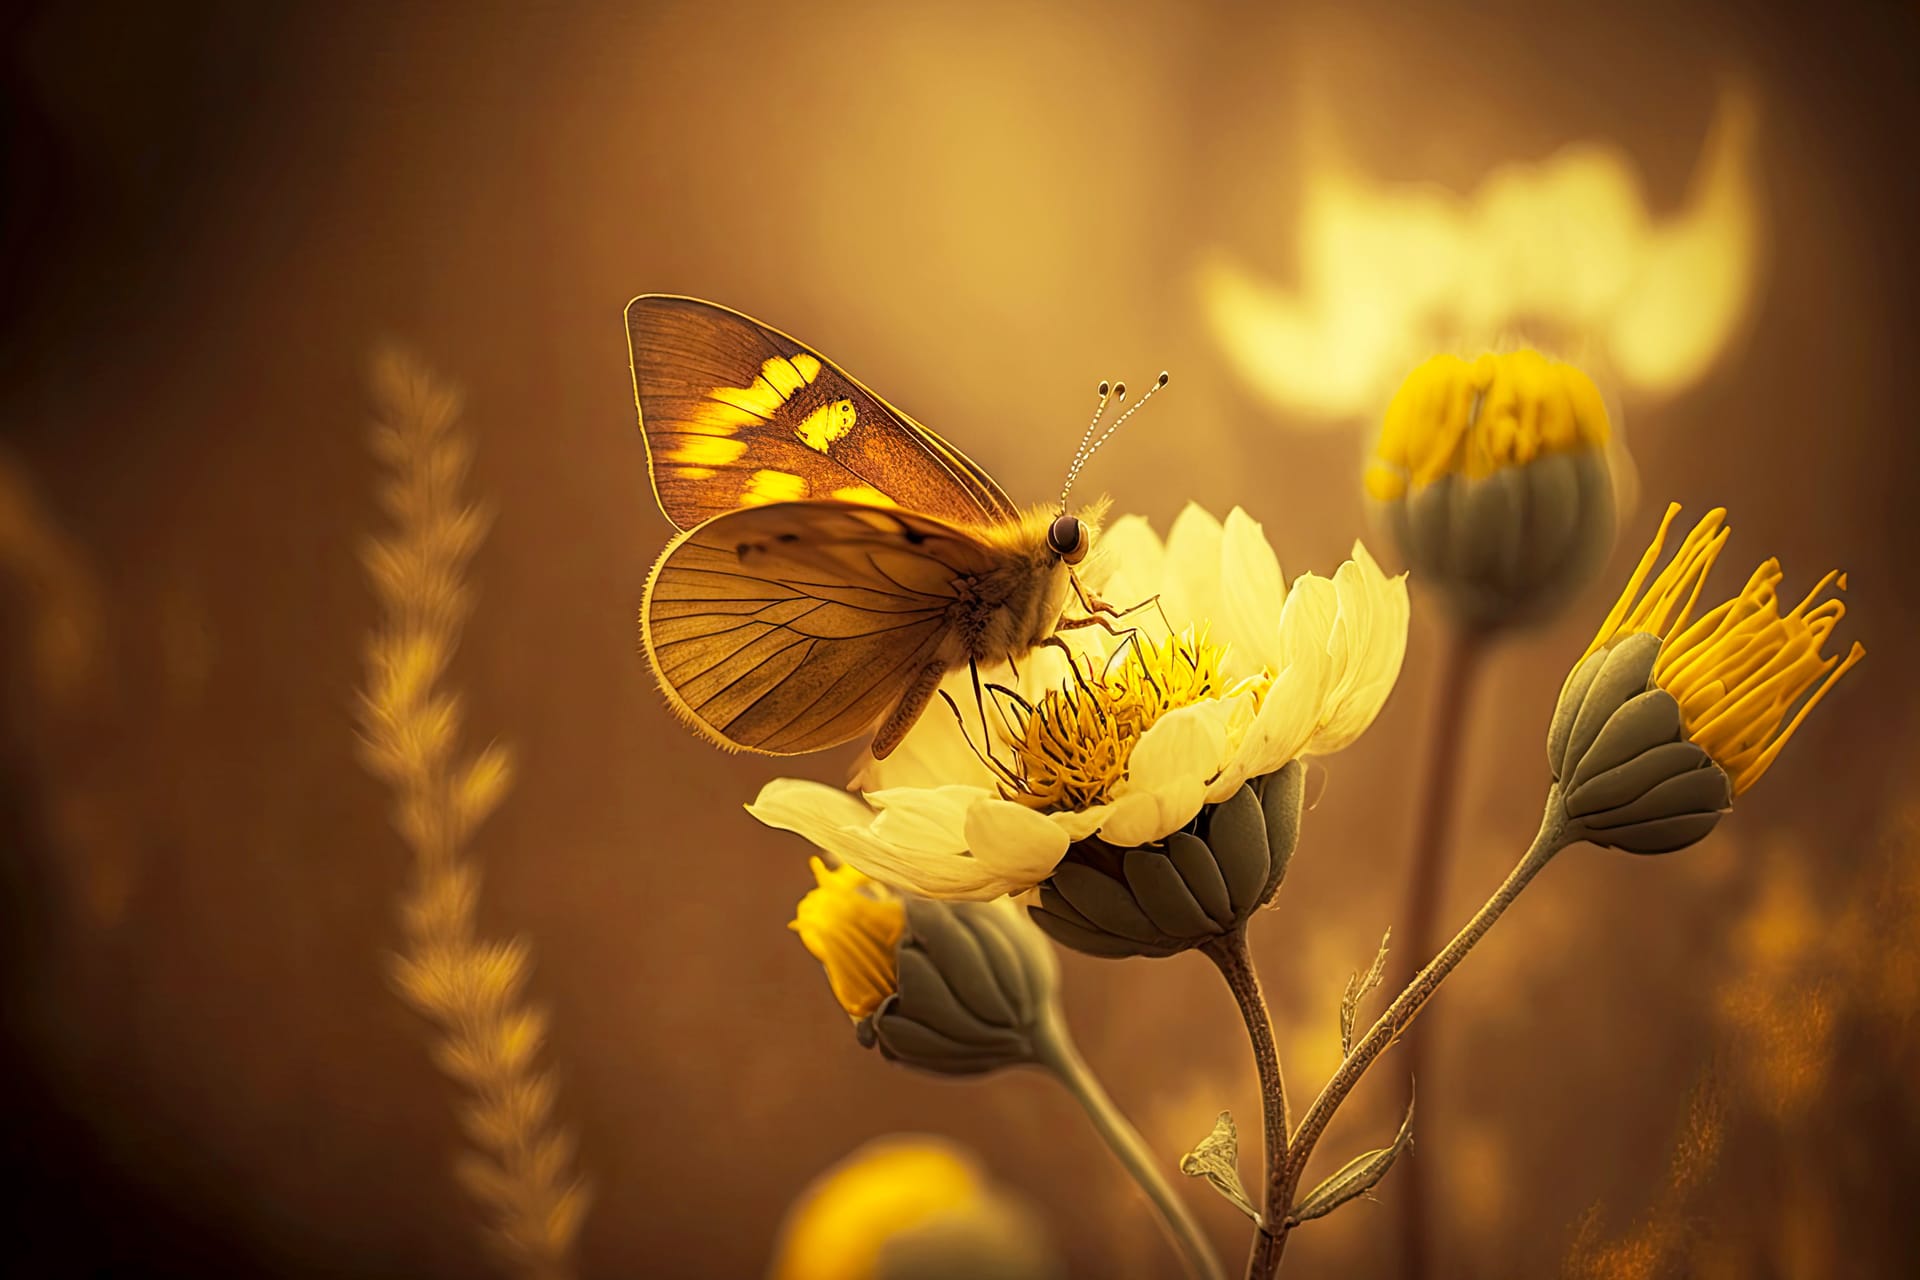 Yellow flower with bud blurred brown background with butterfly picture